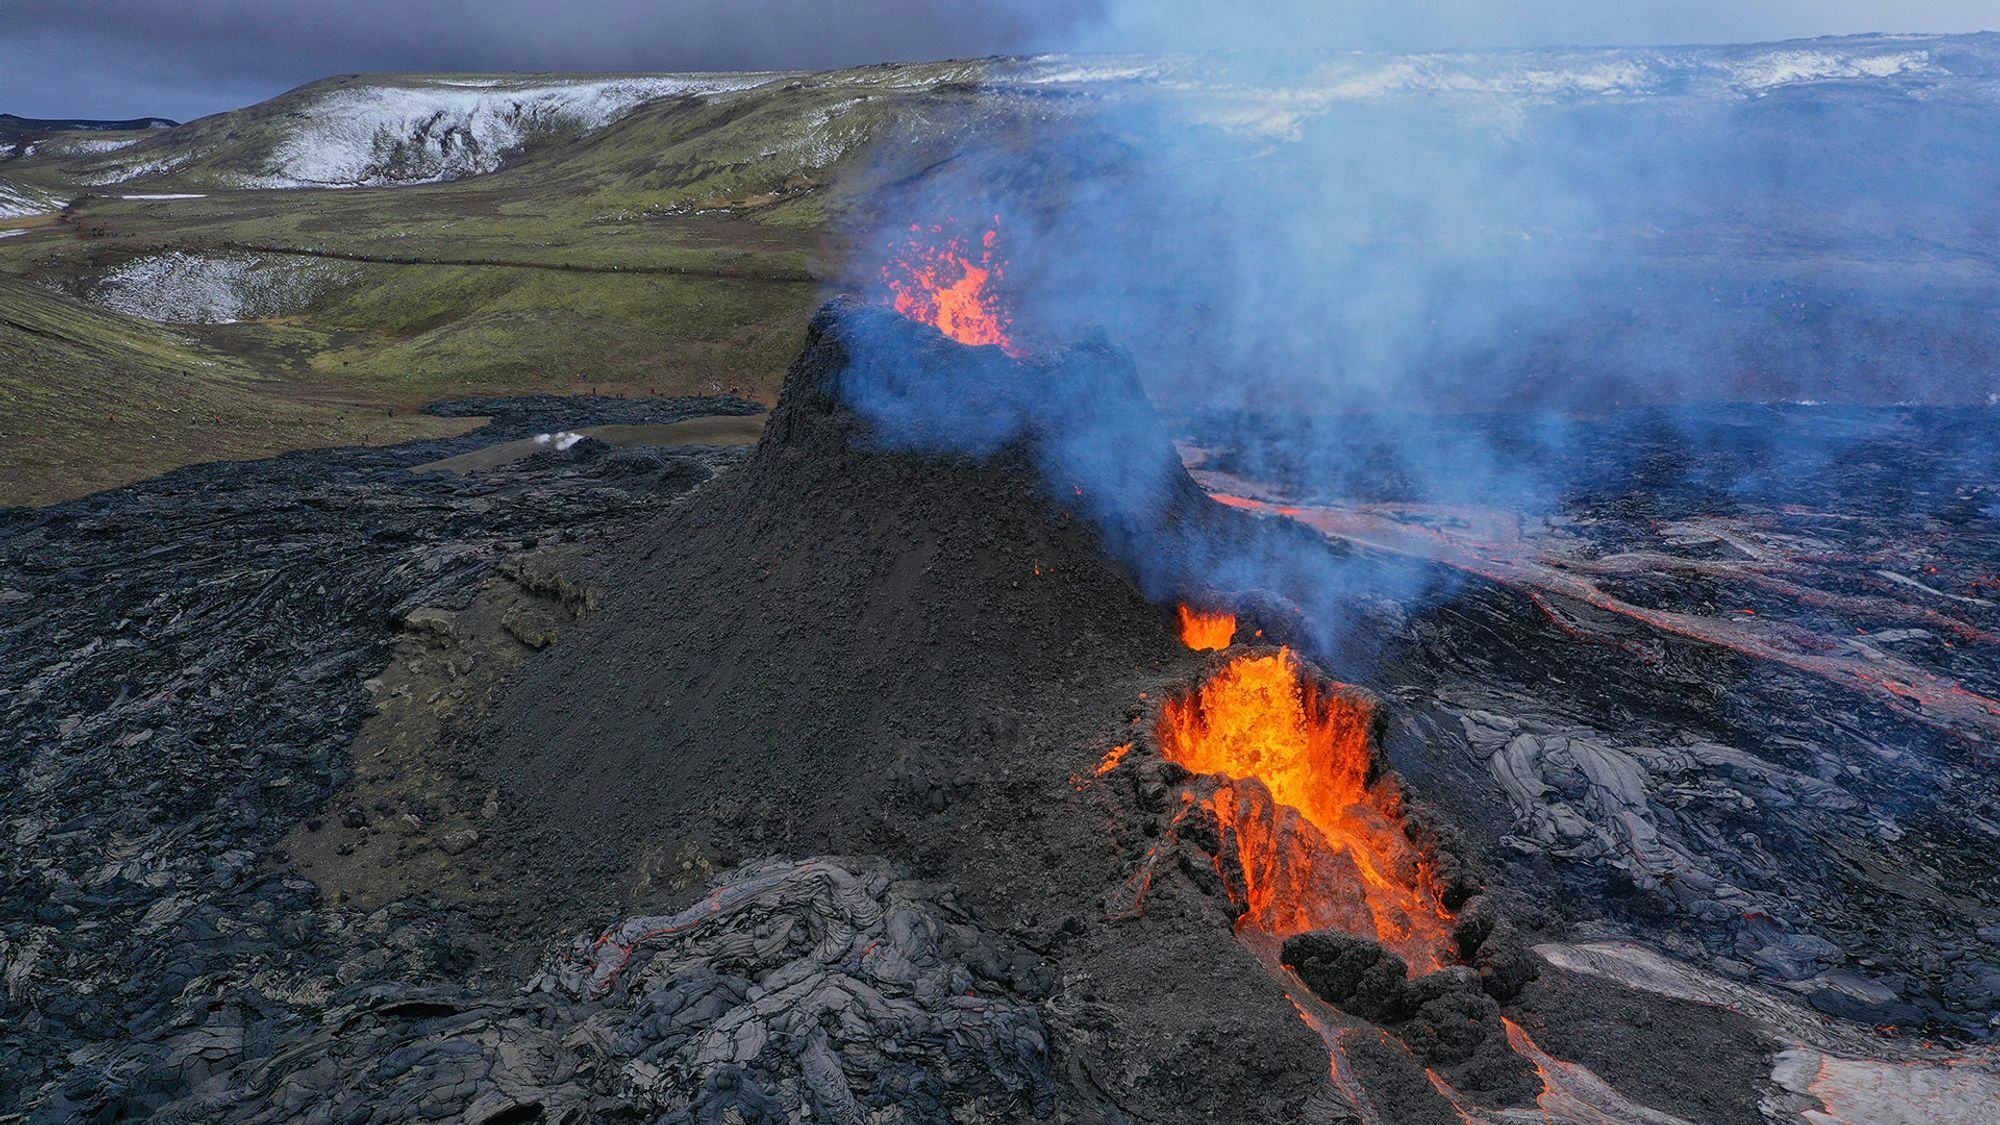 Lava flowing and smoke coming from volcano crater  